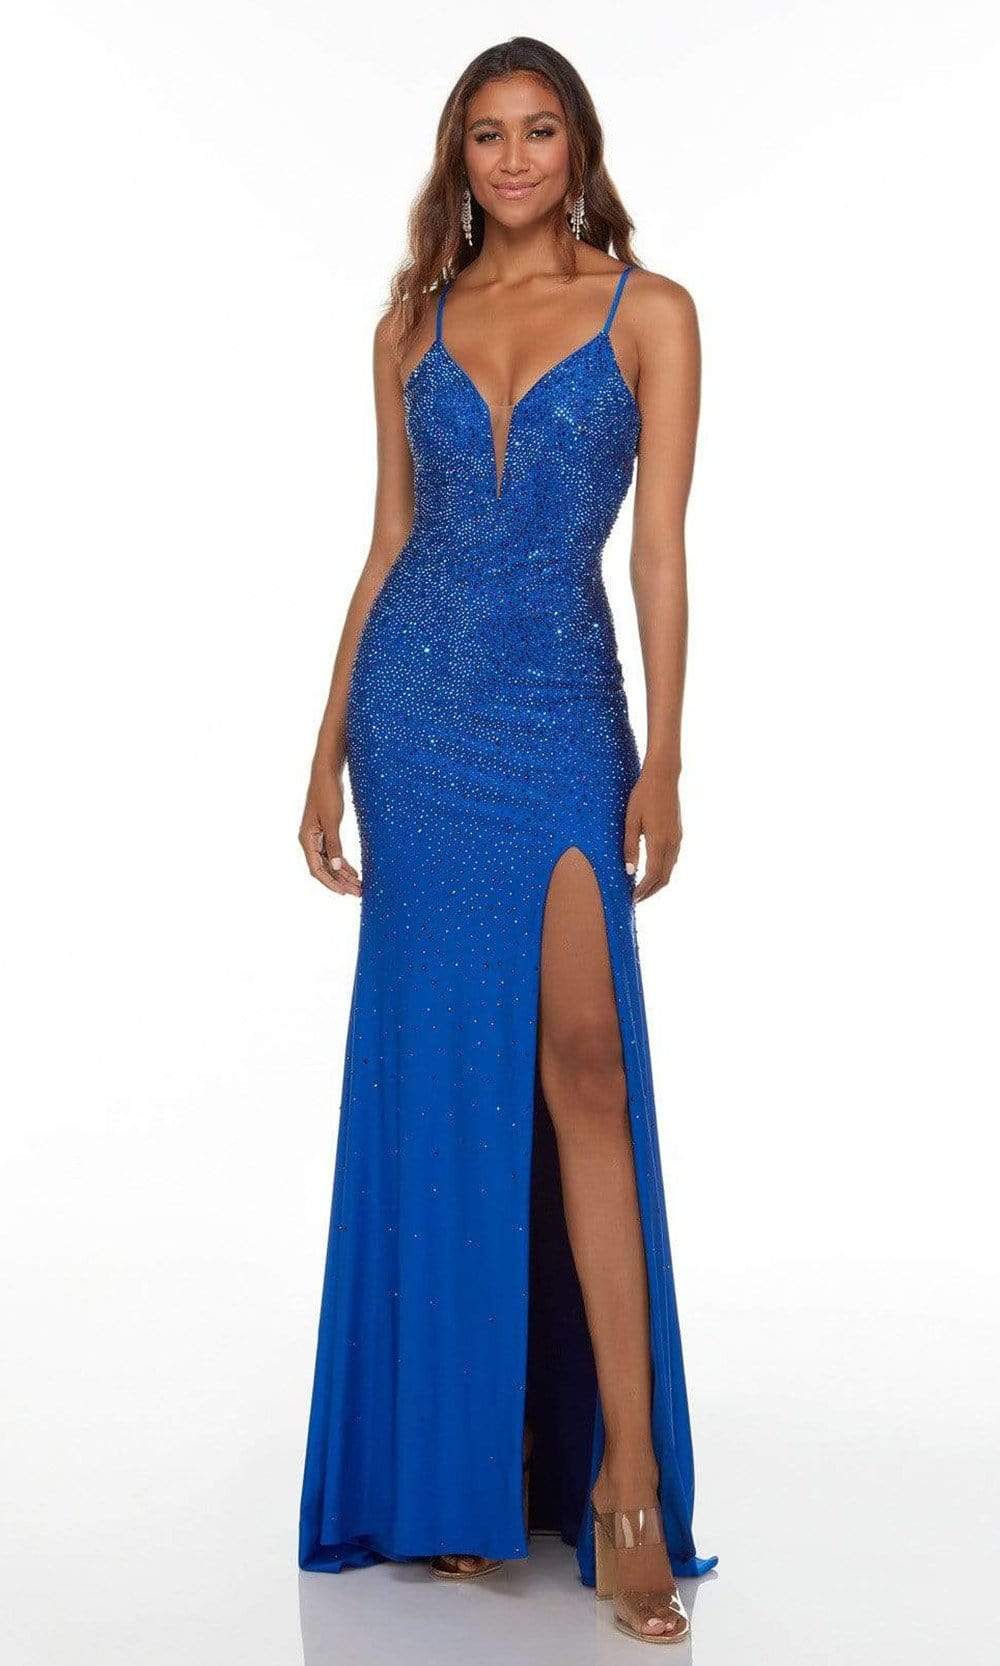 Alyce Paris - 61175 Jewel Strewn Gown With Slit Special Occasion Dress 000 / Royal